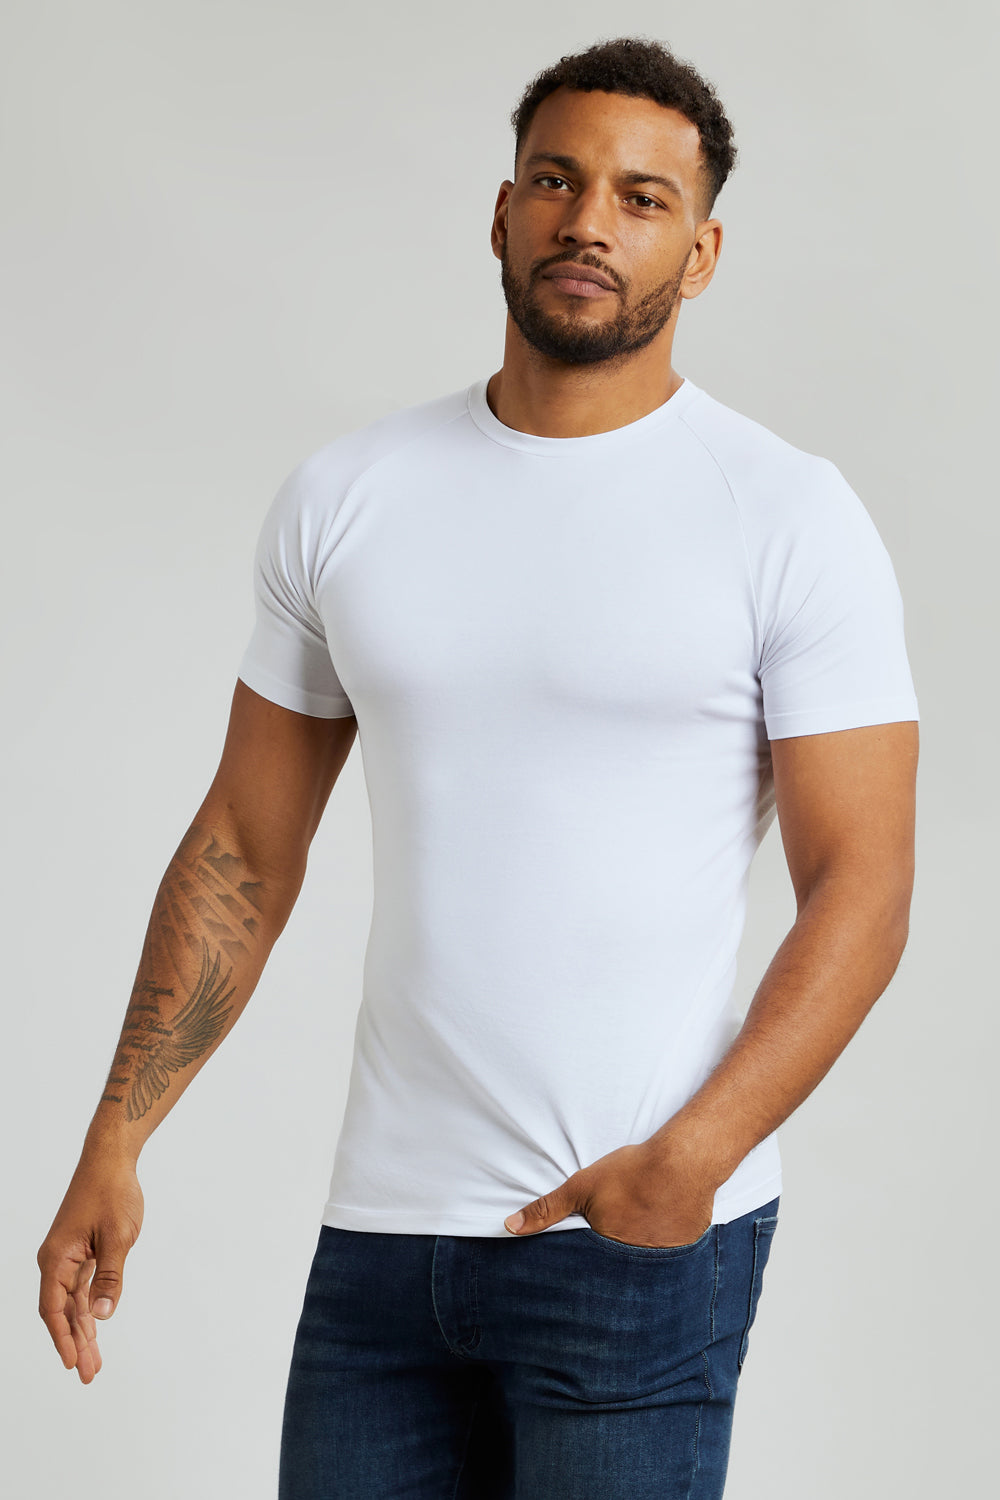 dynasti Acquiesce etikette 3 Pack Basic Athletic Fit T-Shirts in White/Black/Grey - TAILORED ATHLETE